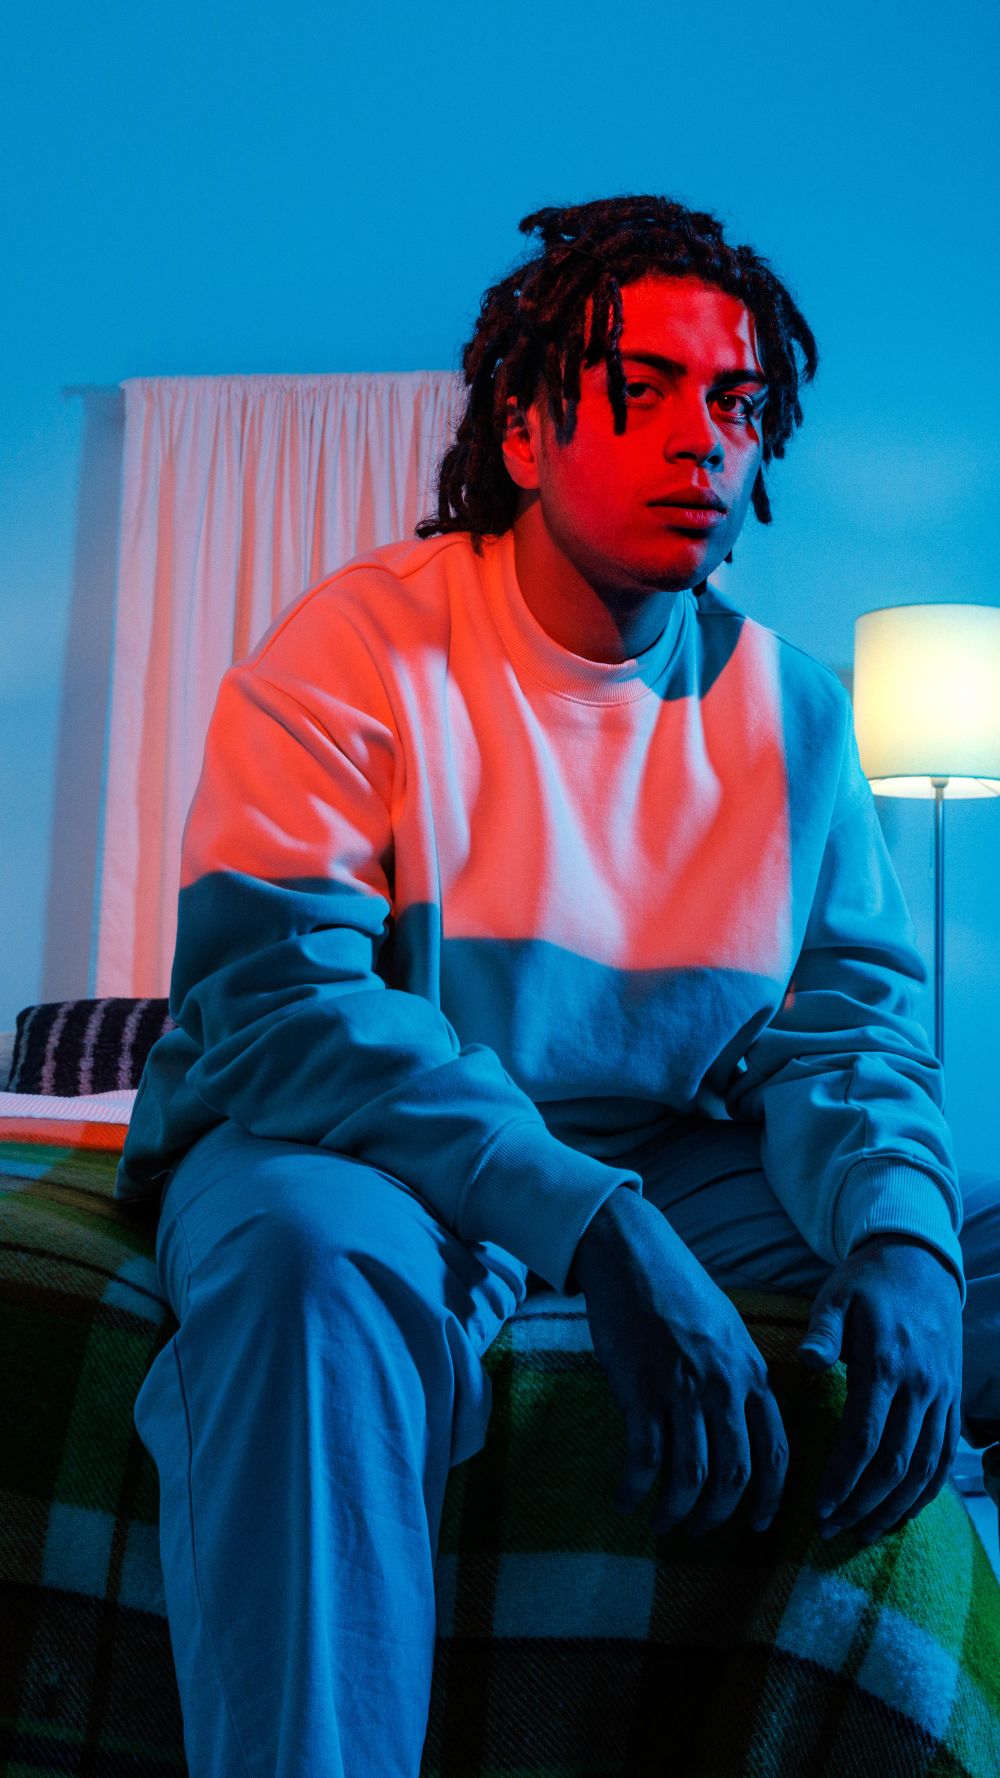 Denzel sitting at the end of a bed in a fluorescent blue and red room